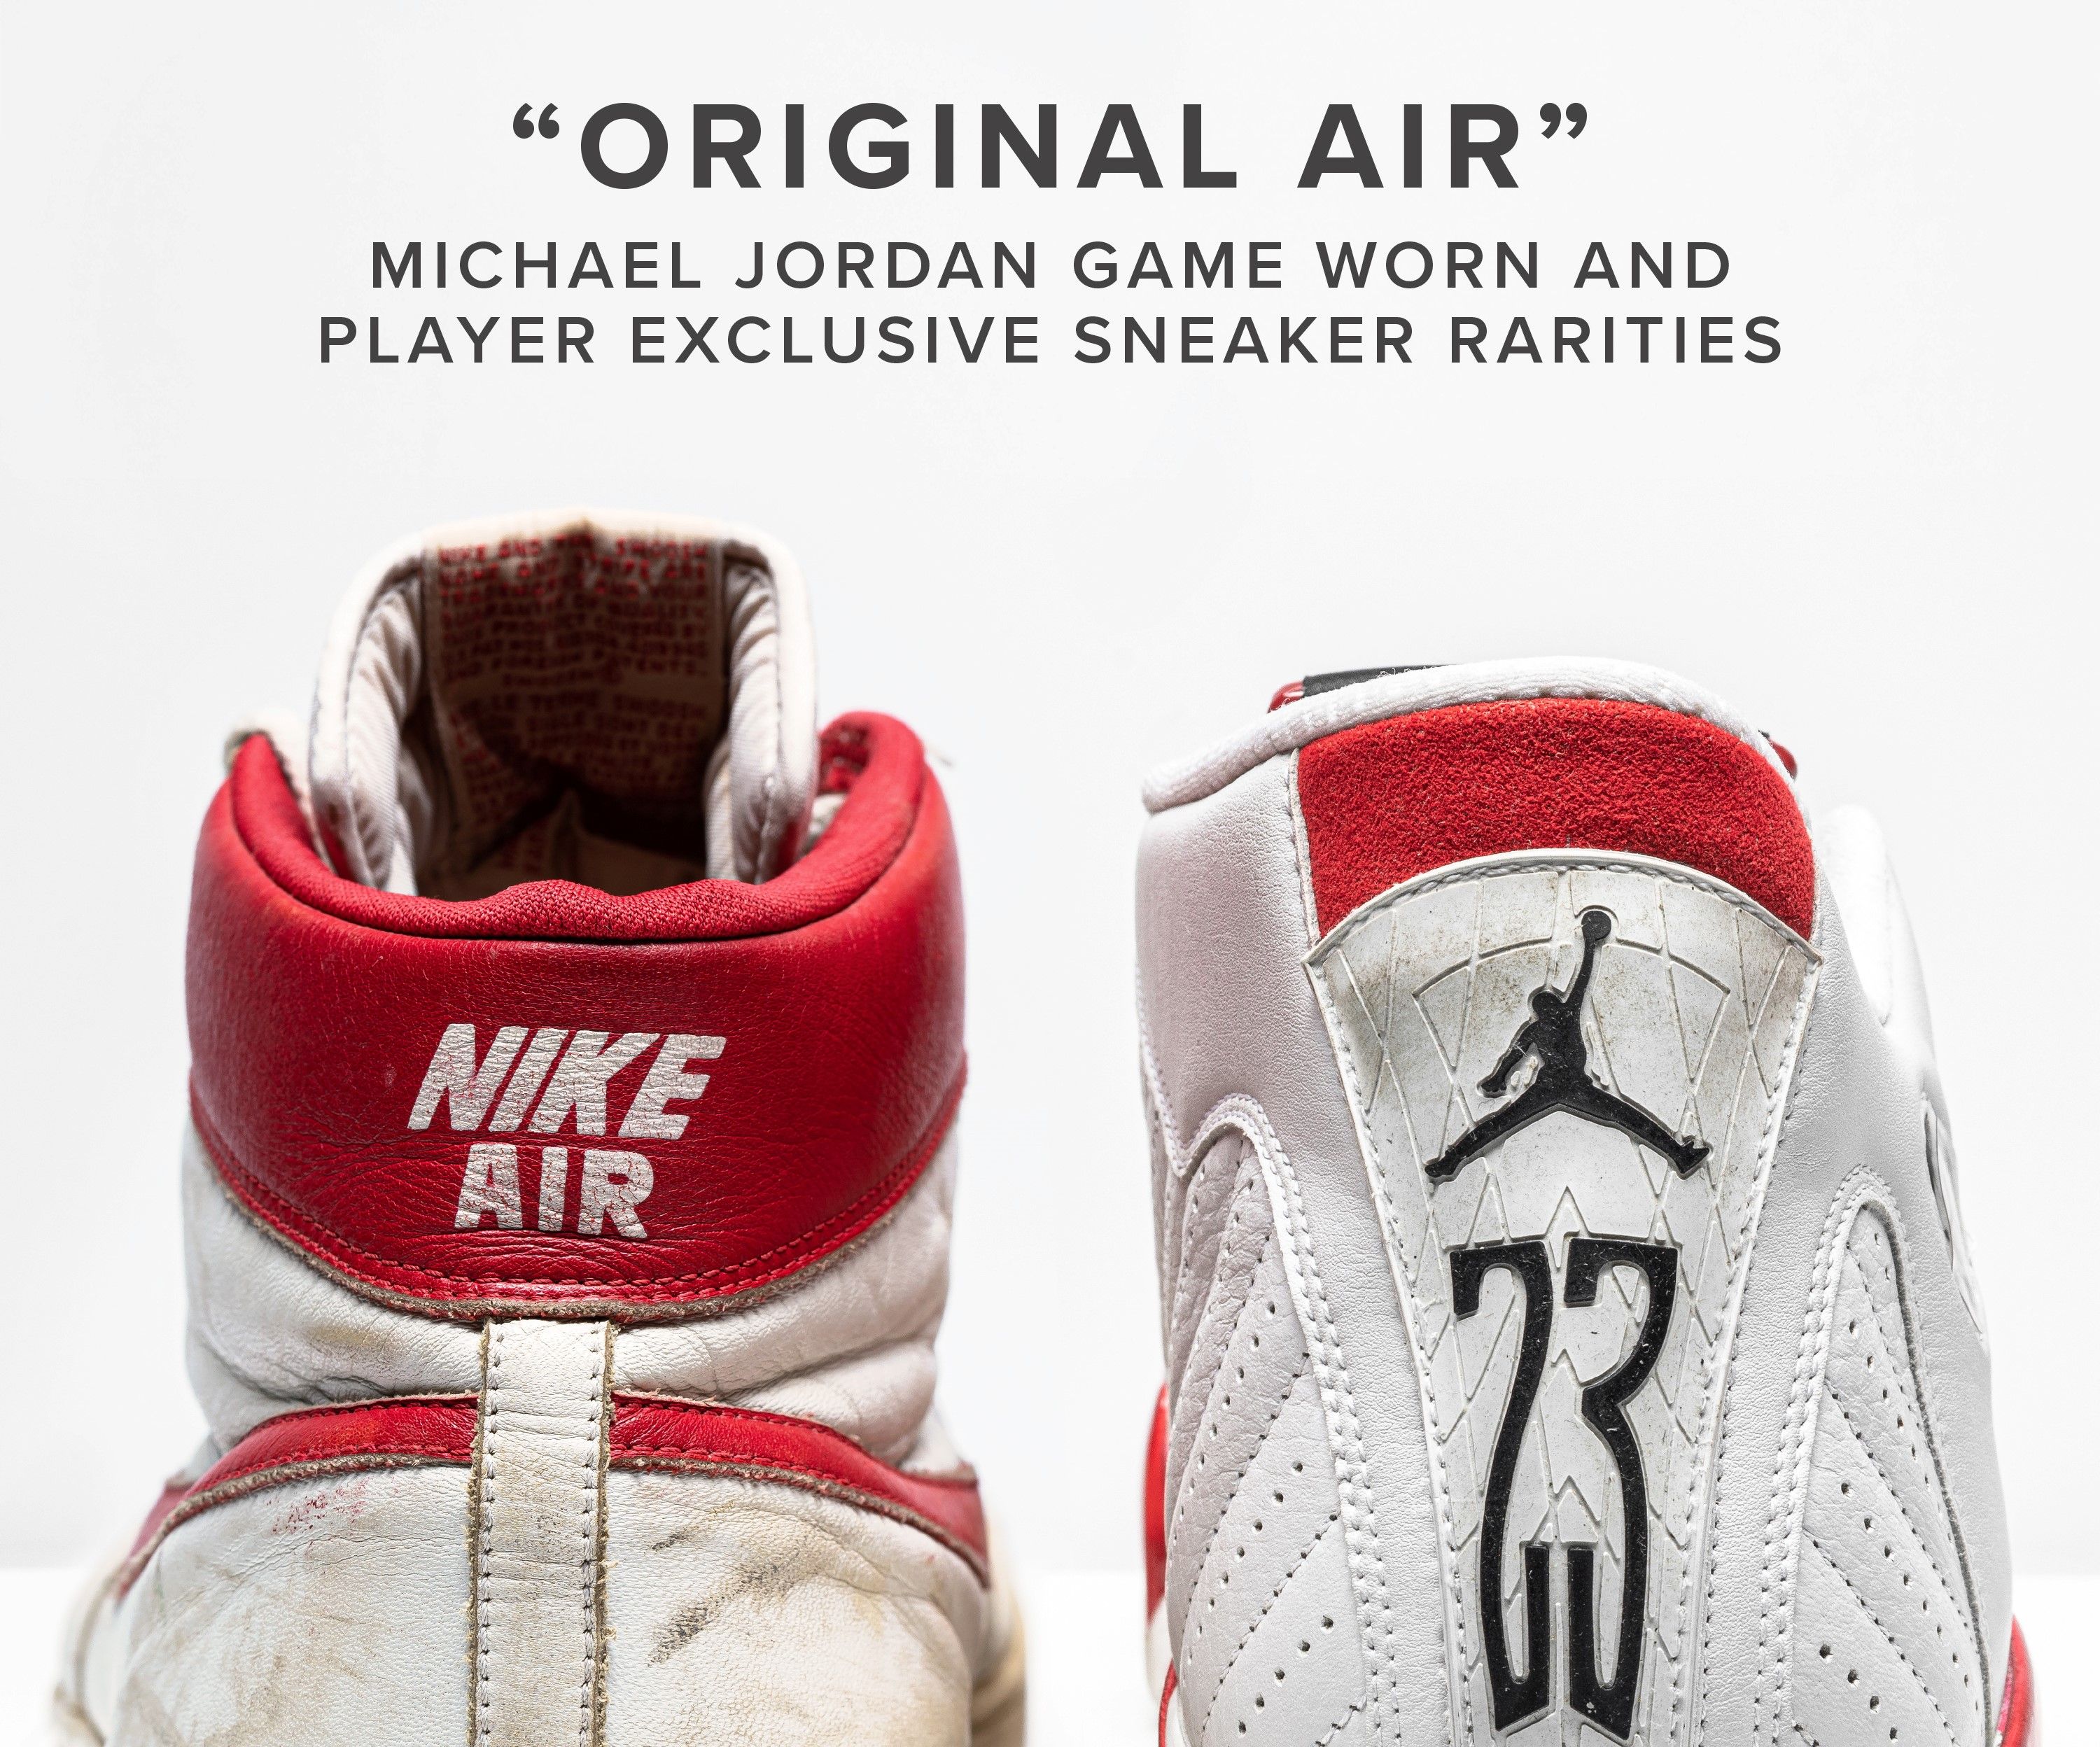 Game-worn Michael Jordan playoff shoes are up for auction